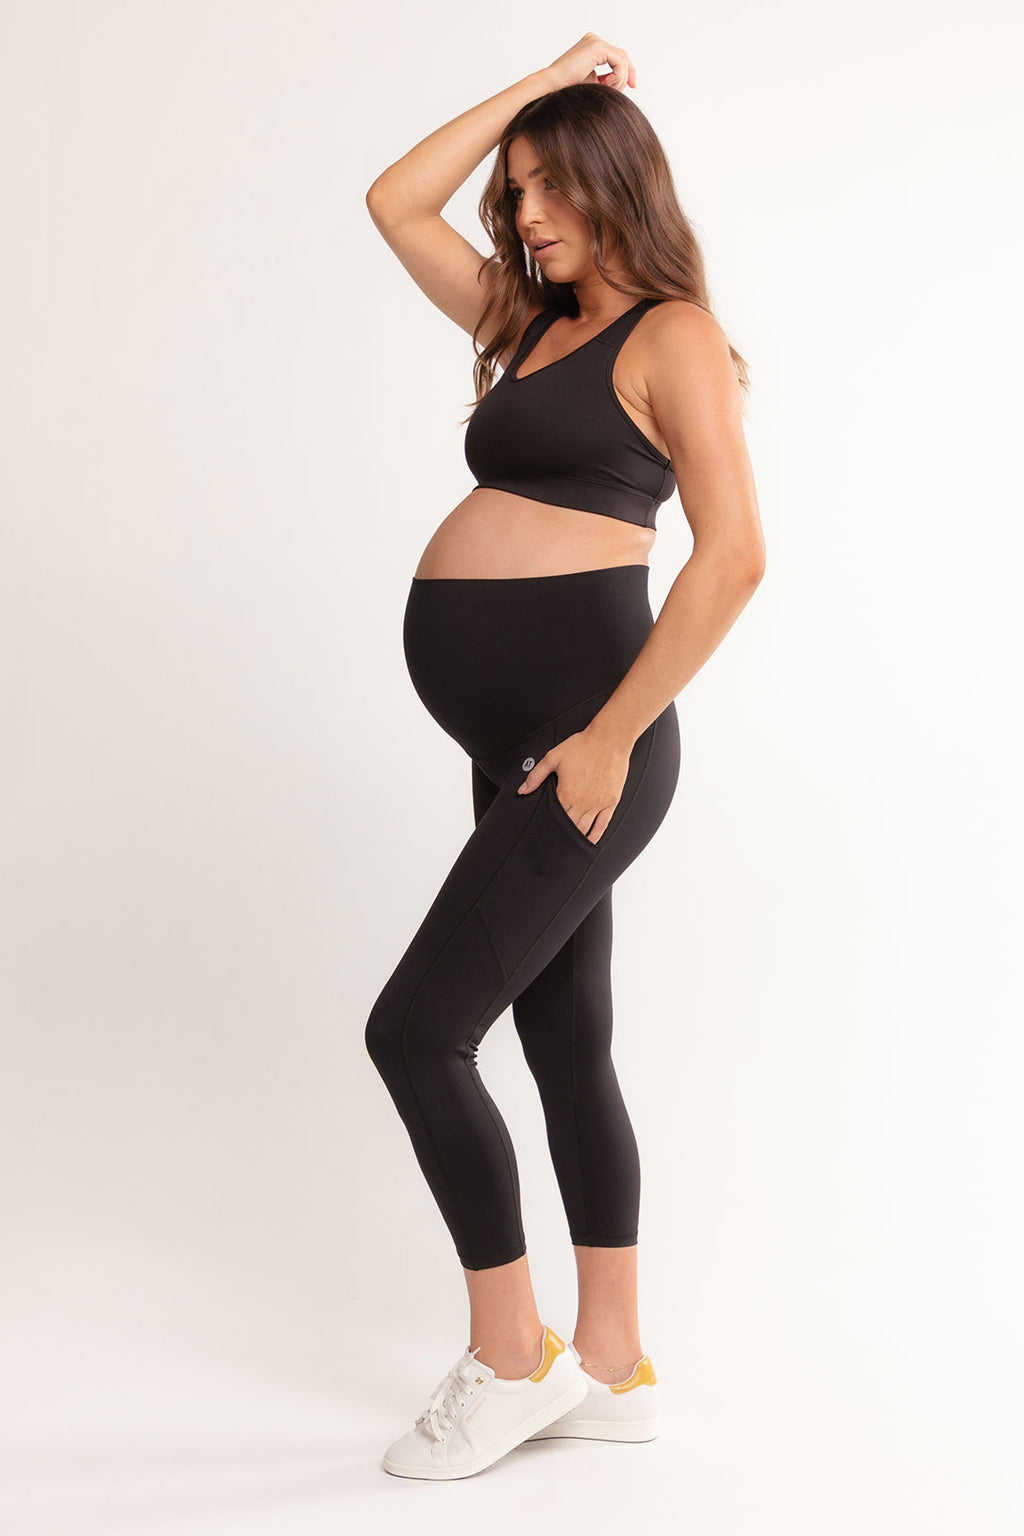 maternity-exercise-tights-small-side
